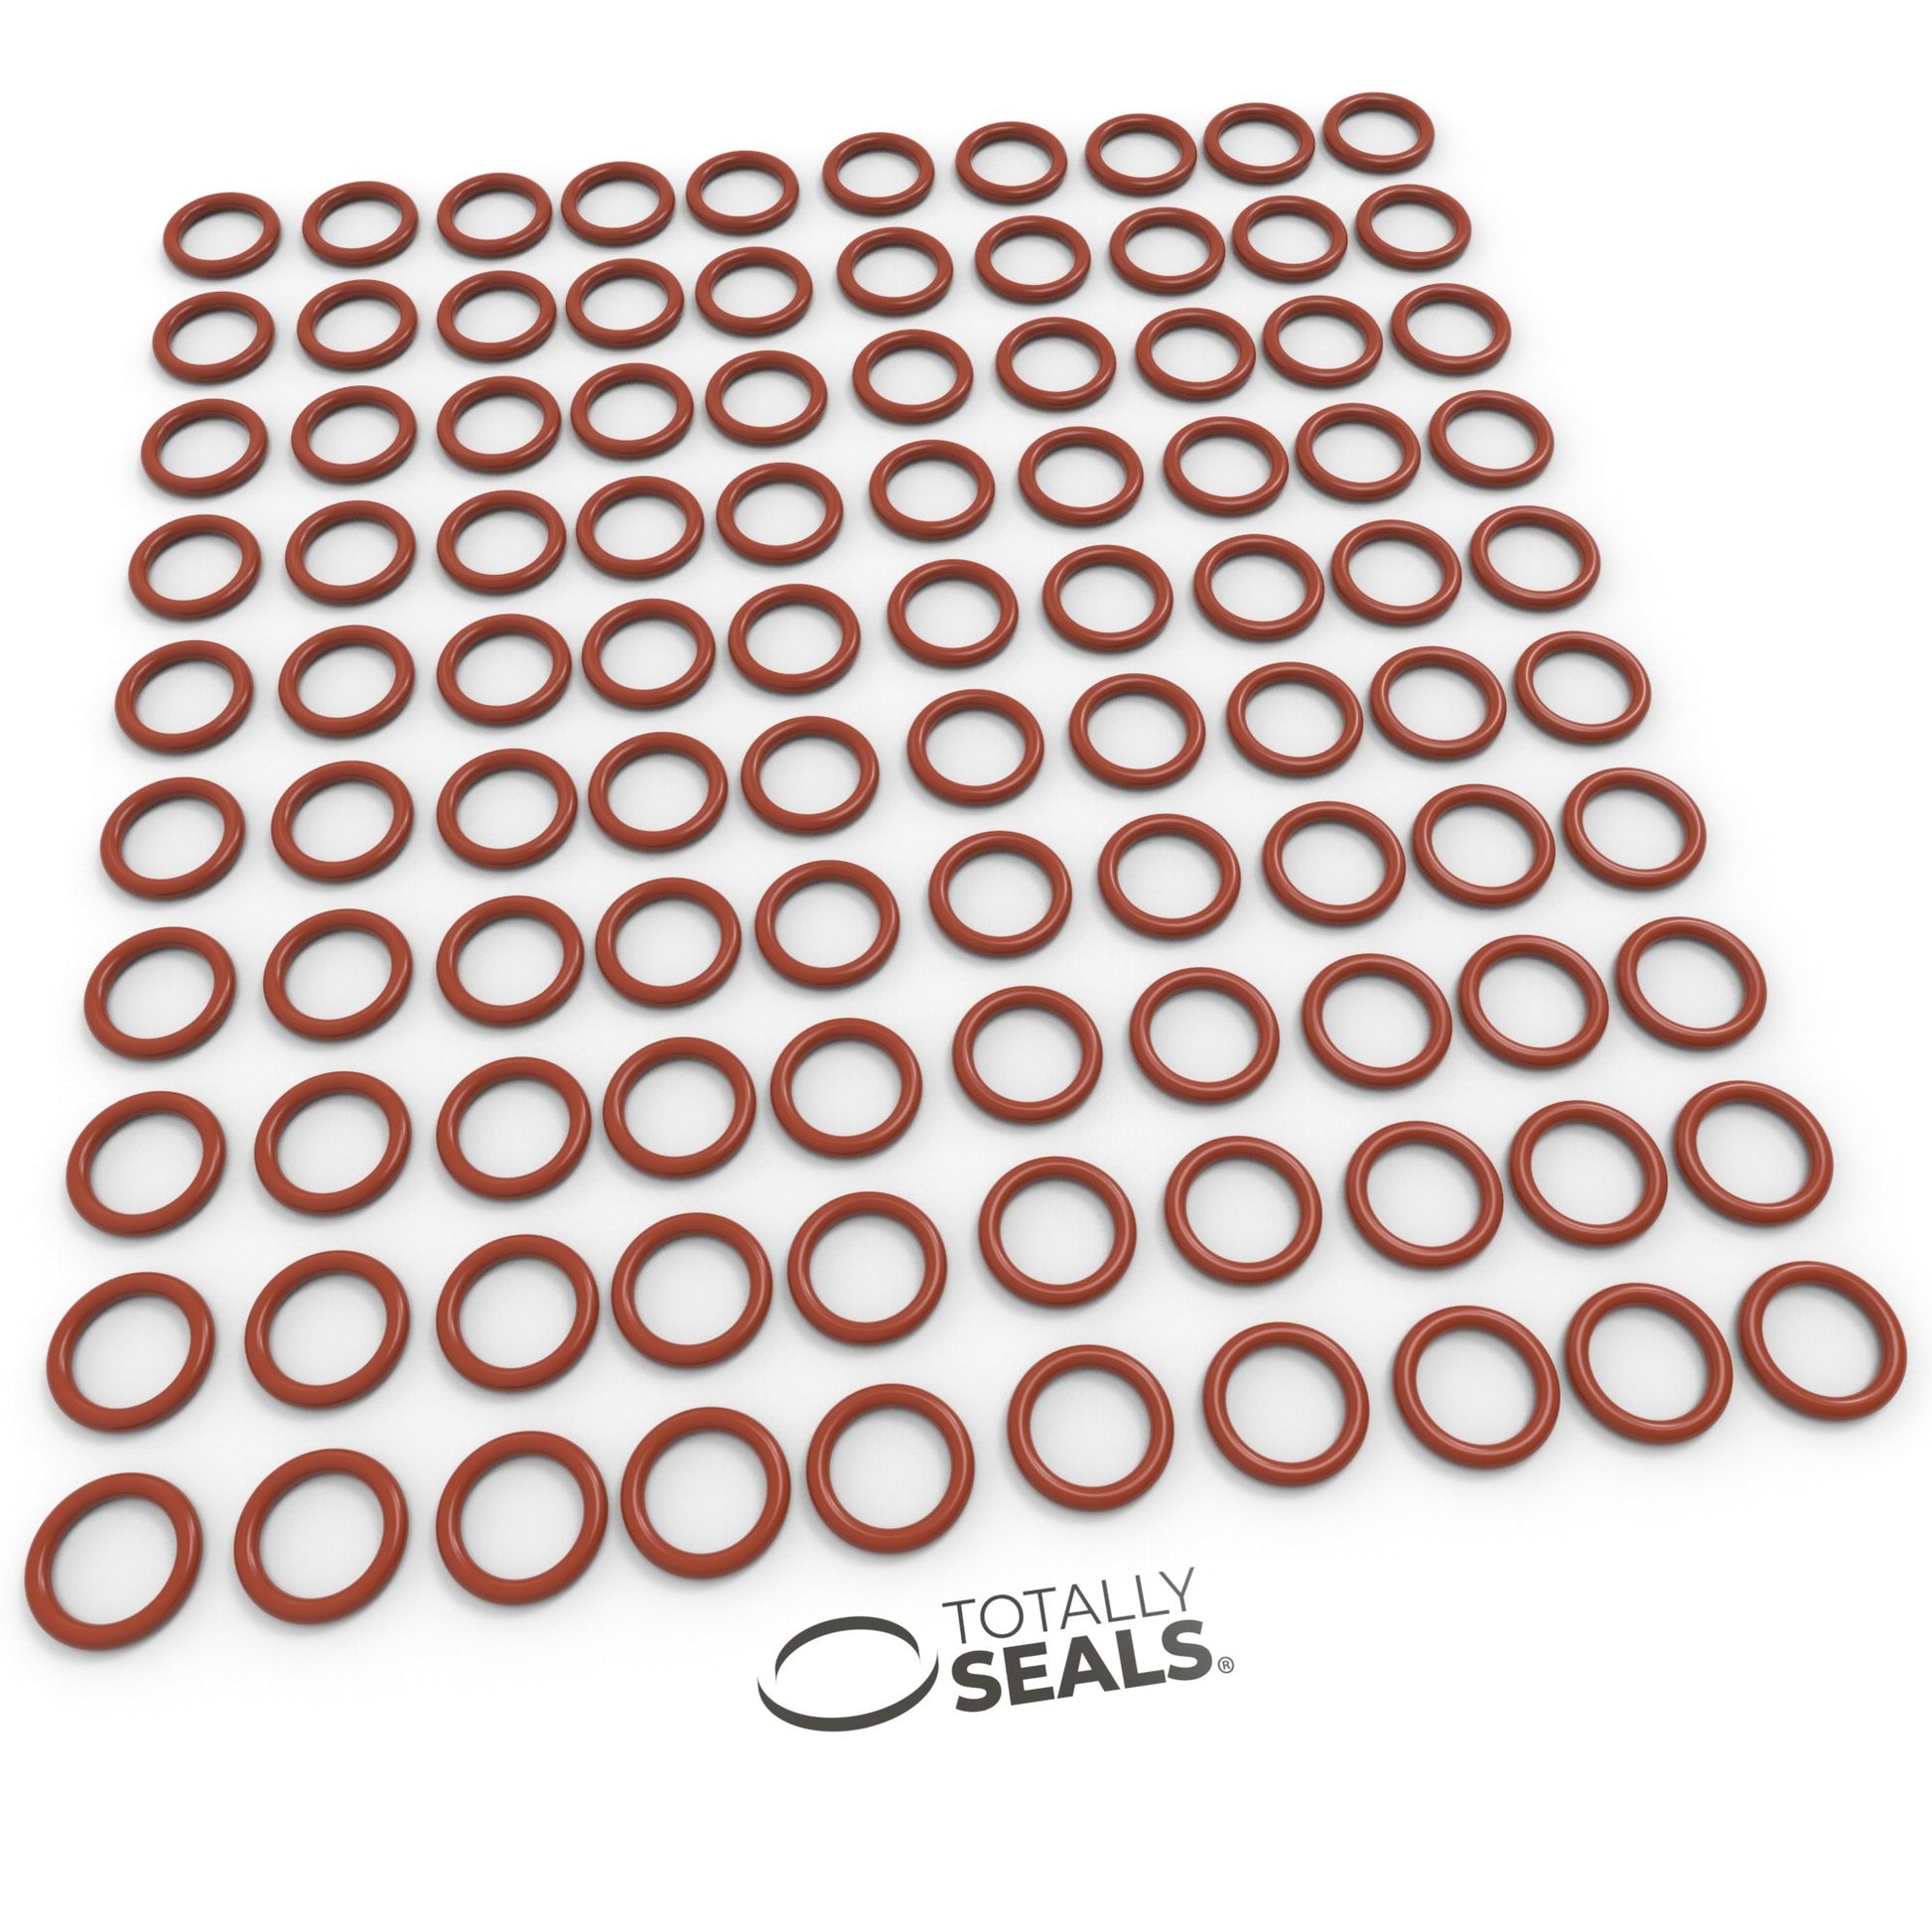 16mm x 2.5mm (21mm OD) Silicone O-Rings - Totally Seals®